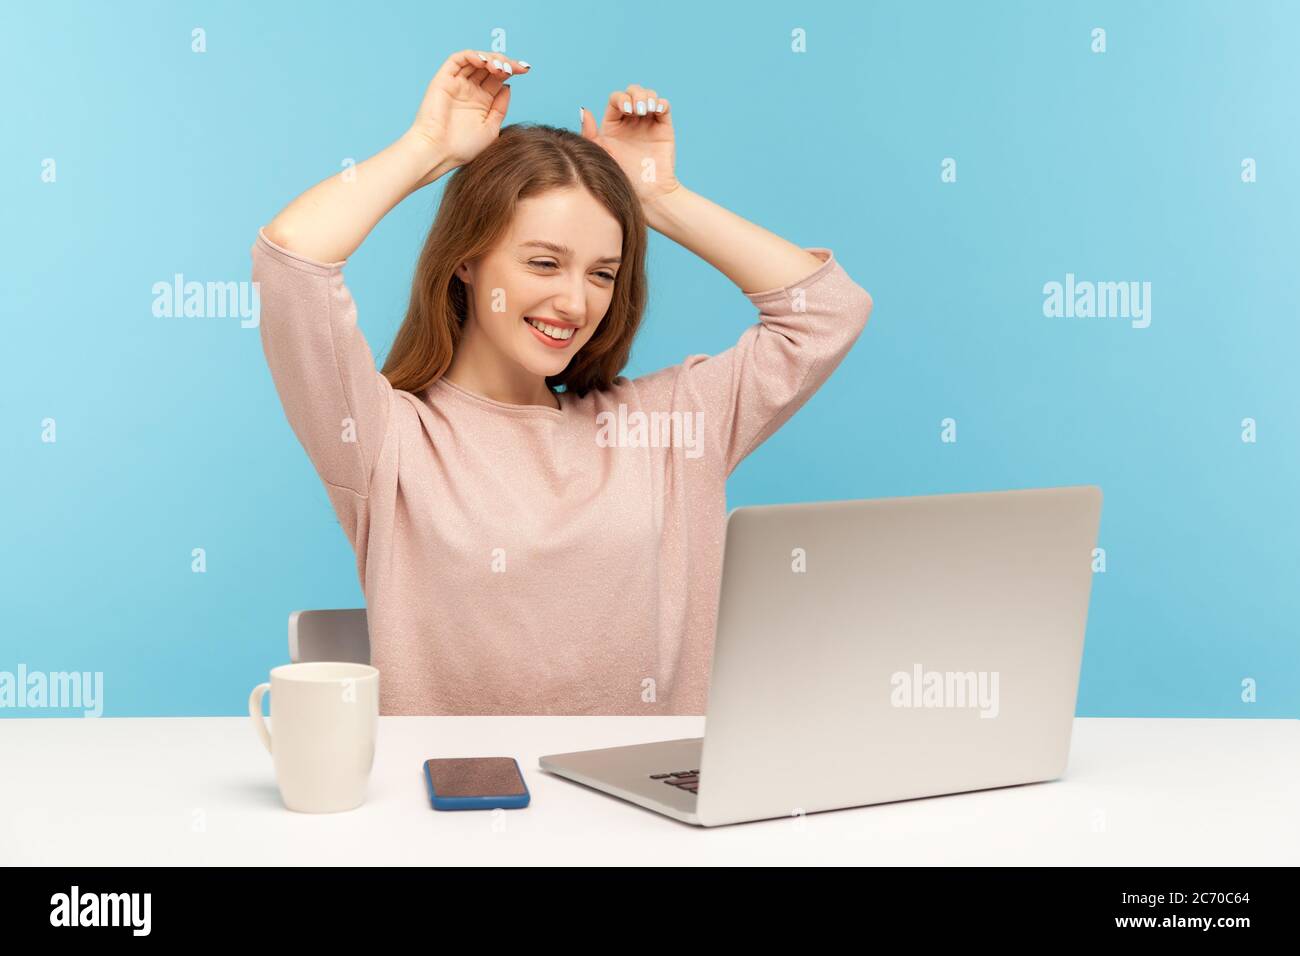 Positive playful young woman smiling and showing bunny ears on head while looking on laptop screen on video call, chatting on webcam and flirting. ind Stock Photo